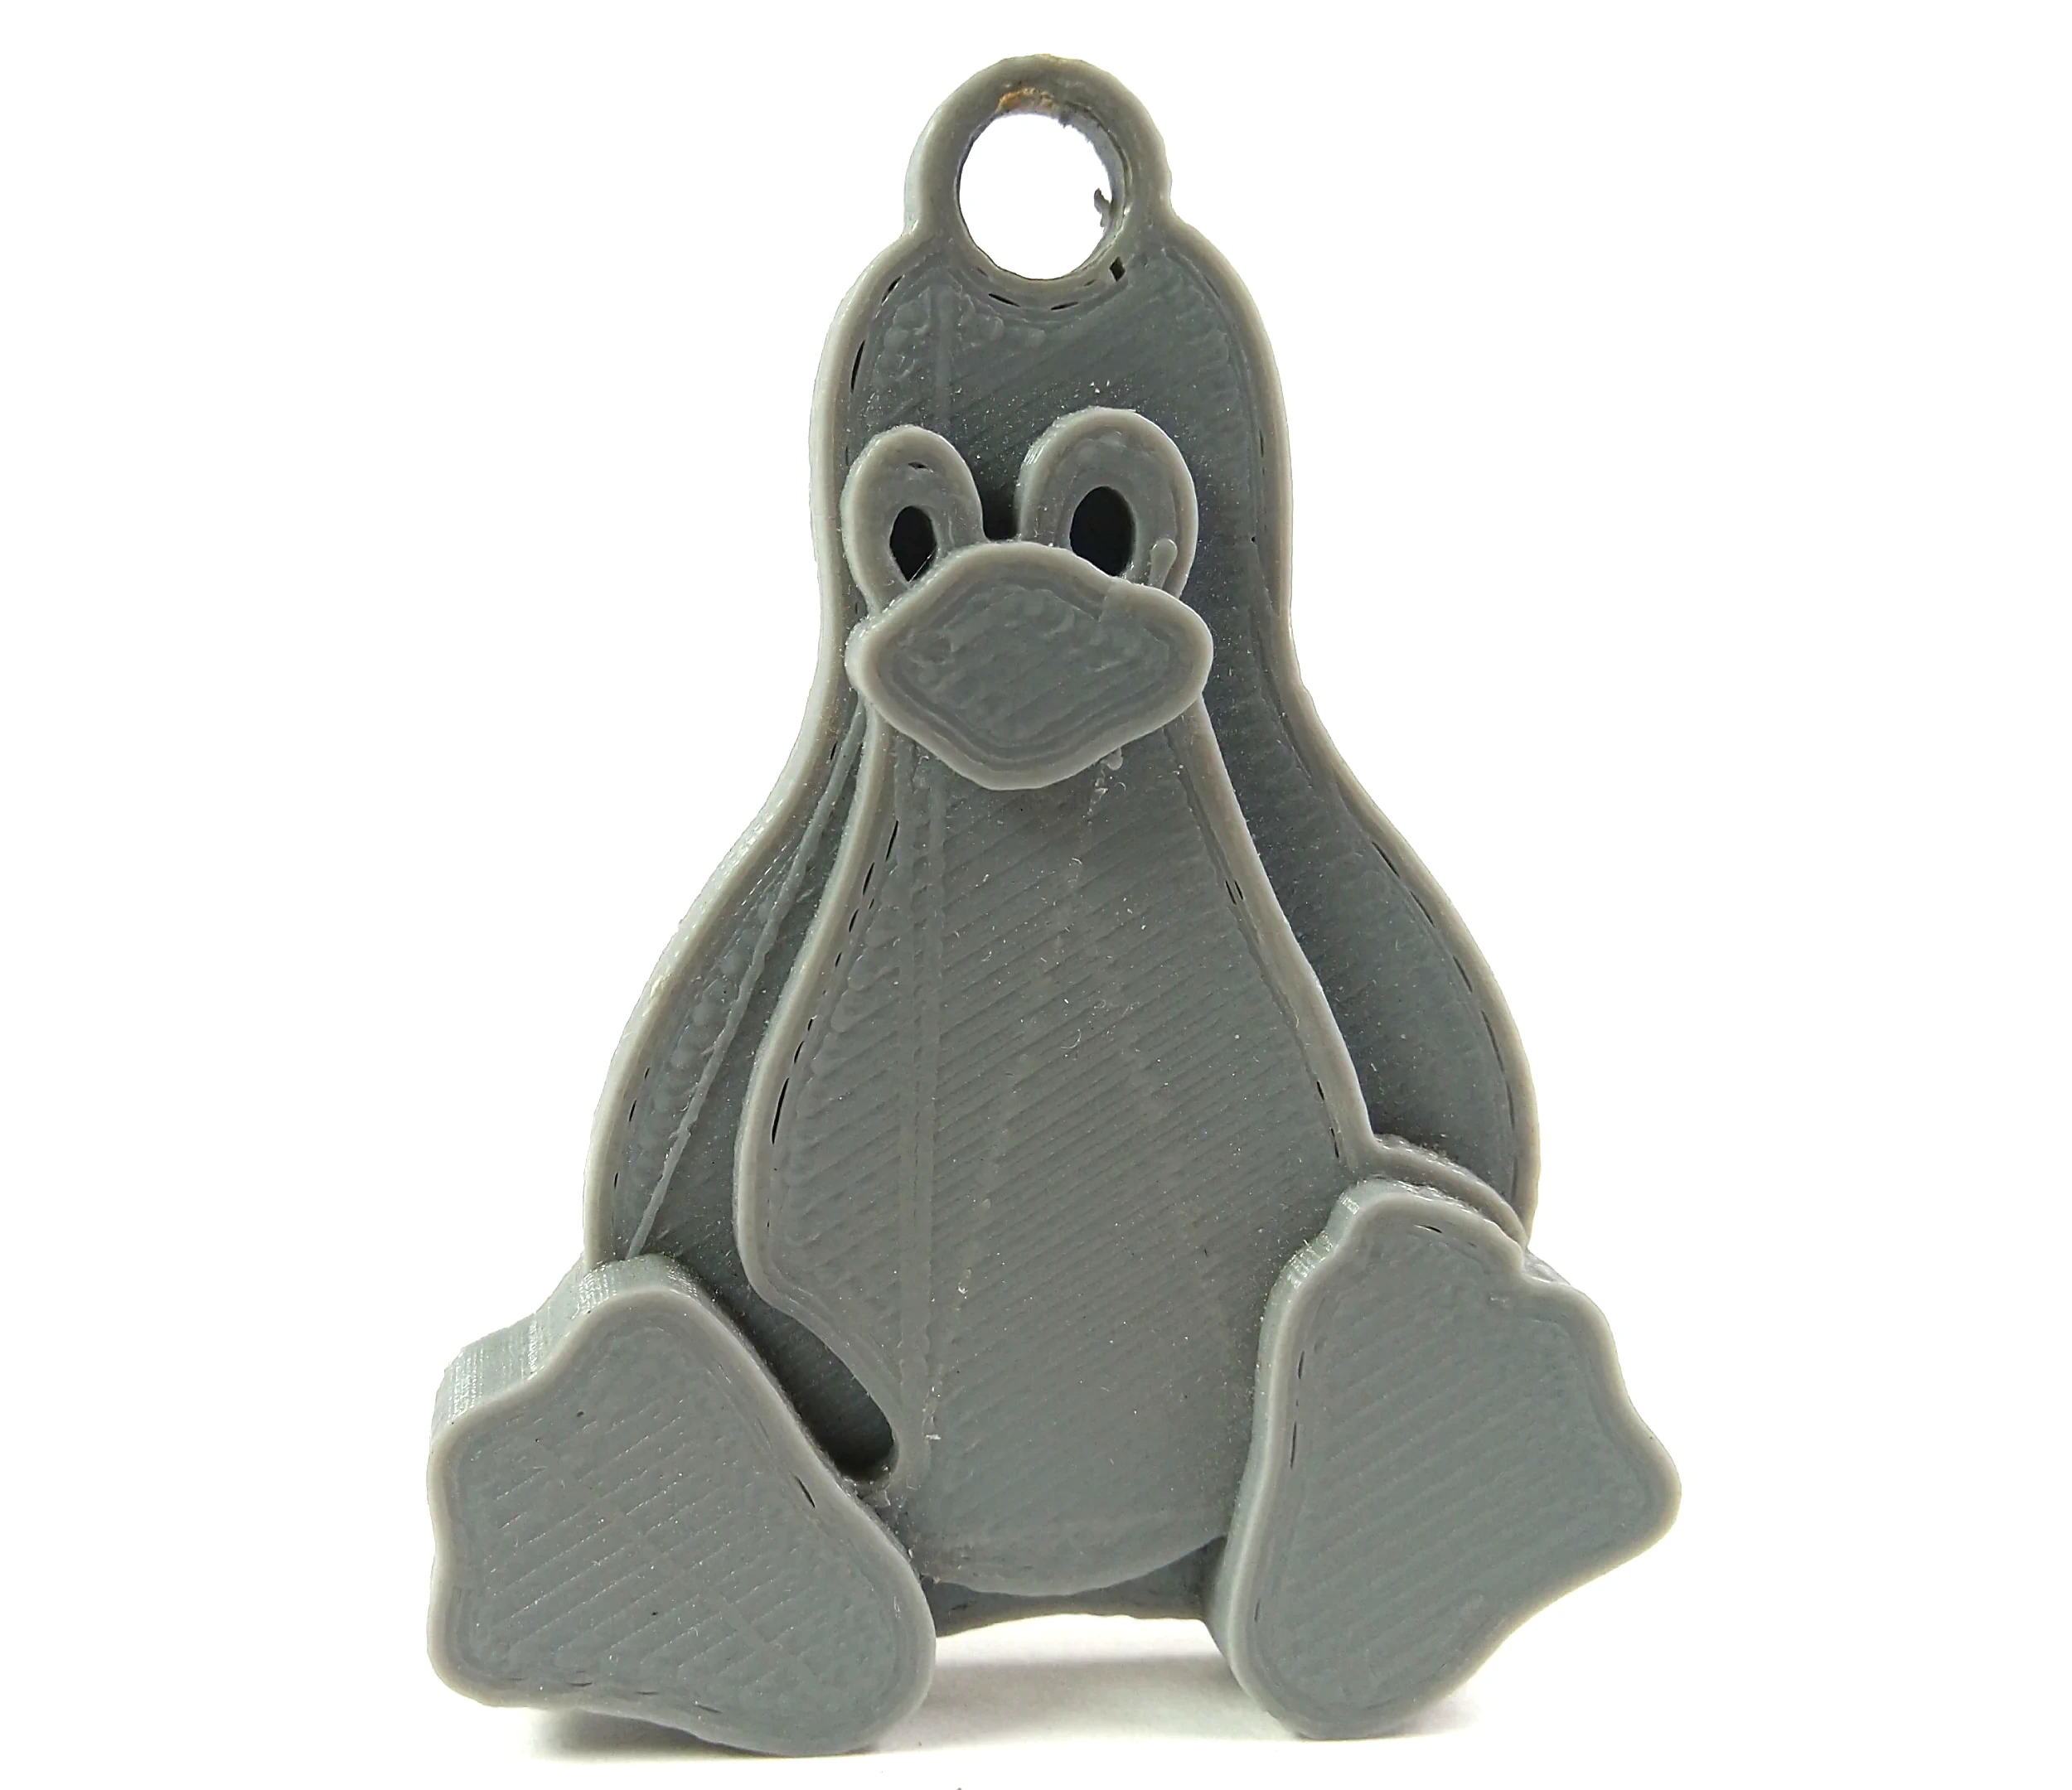 Linux Tux keychain https://thingiverse.com/thing:2493801